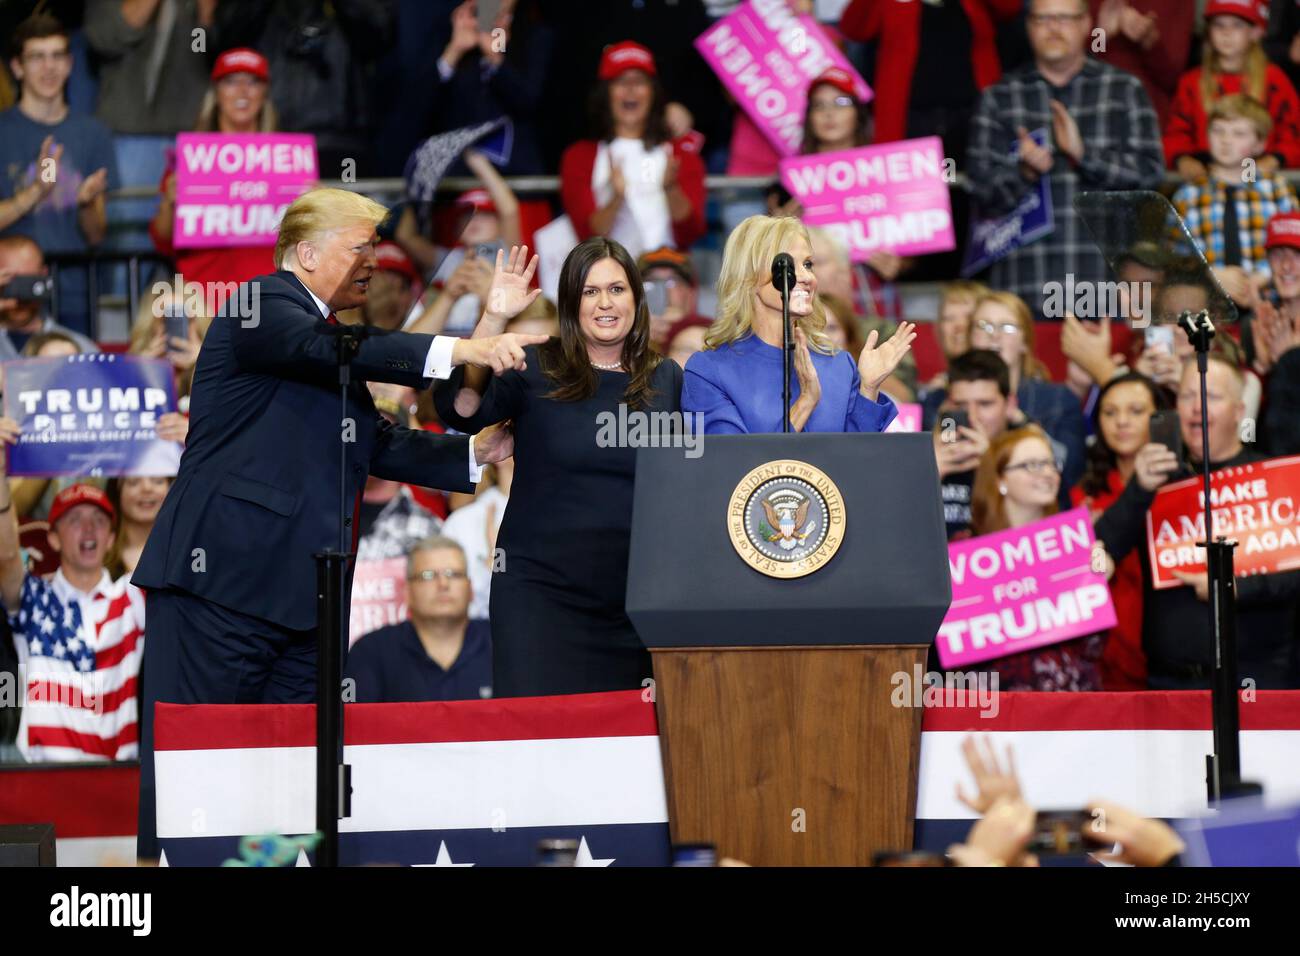 11052018 - Fort Wayne, Indiana, USA: White House Press Secretary Sarah Huckabee Sanders and Kellyanne Elizabeth Conway appear with United States President Donald J. Trump who is campaigning for Indiana congressional candidates, including Mike Braun, who is running for senate, during a Make America Great Again! rally at the Allen County War Memorial Coliseum in Fort Wayne, Indiana. Stock Photo